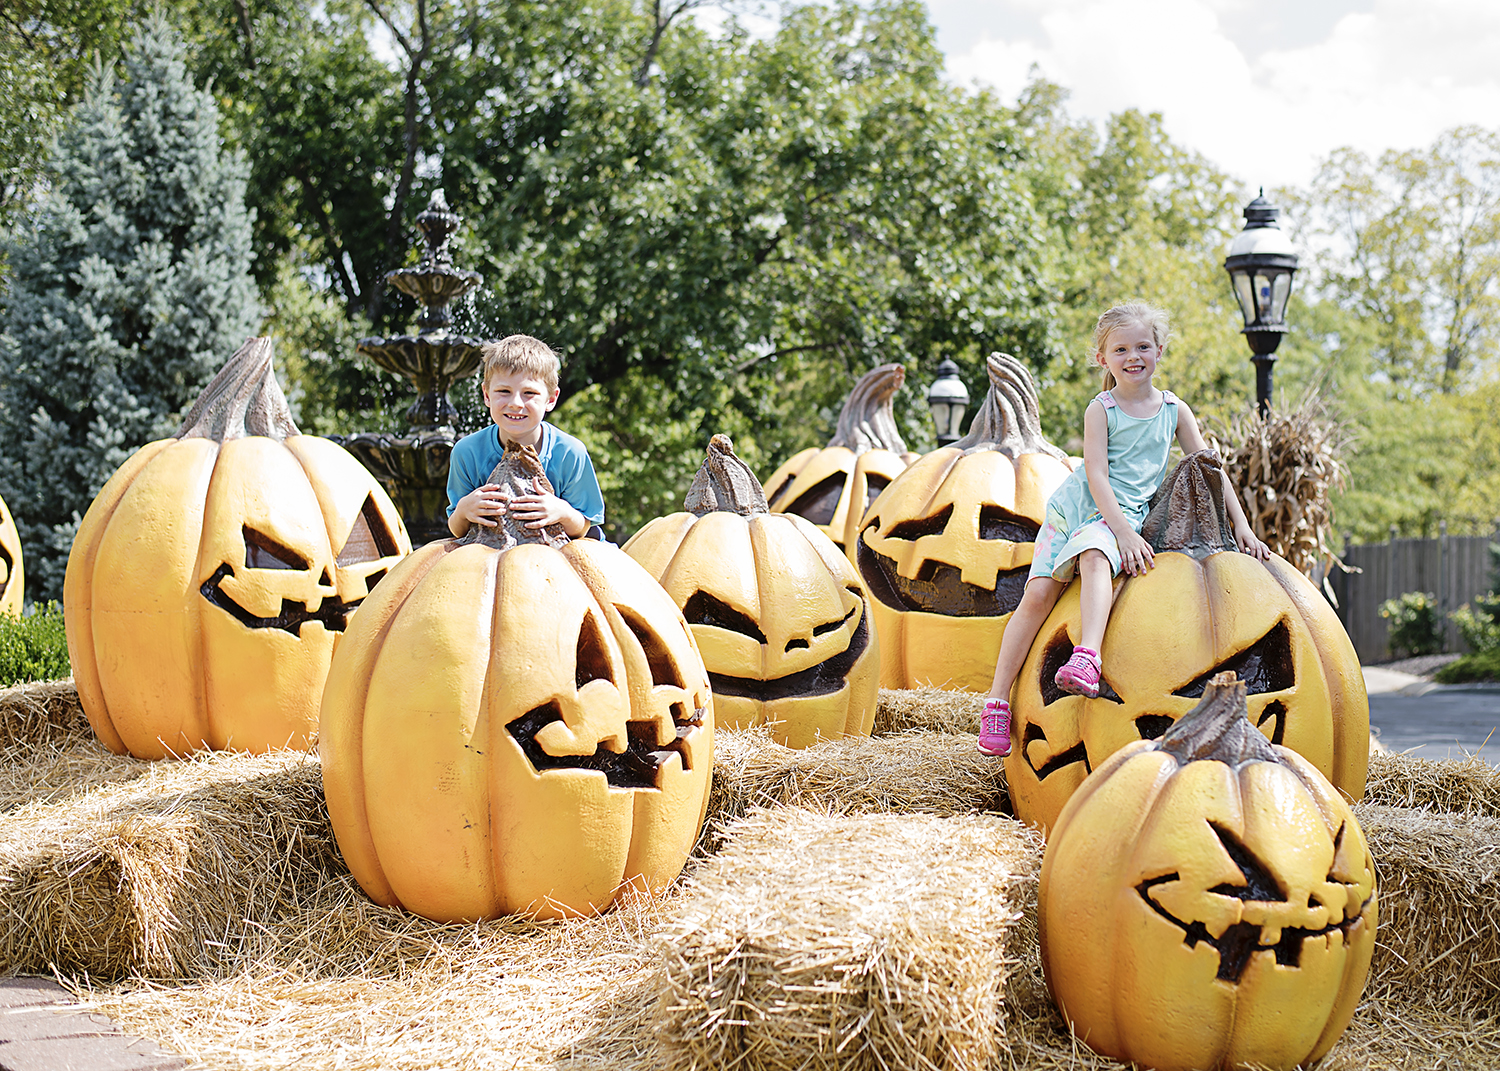 Things to do in Kansas City : Great Pumpkin Fest at World's of Fun